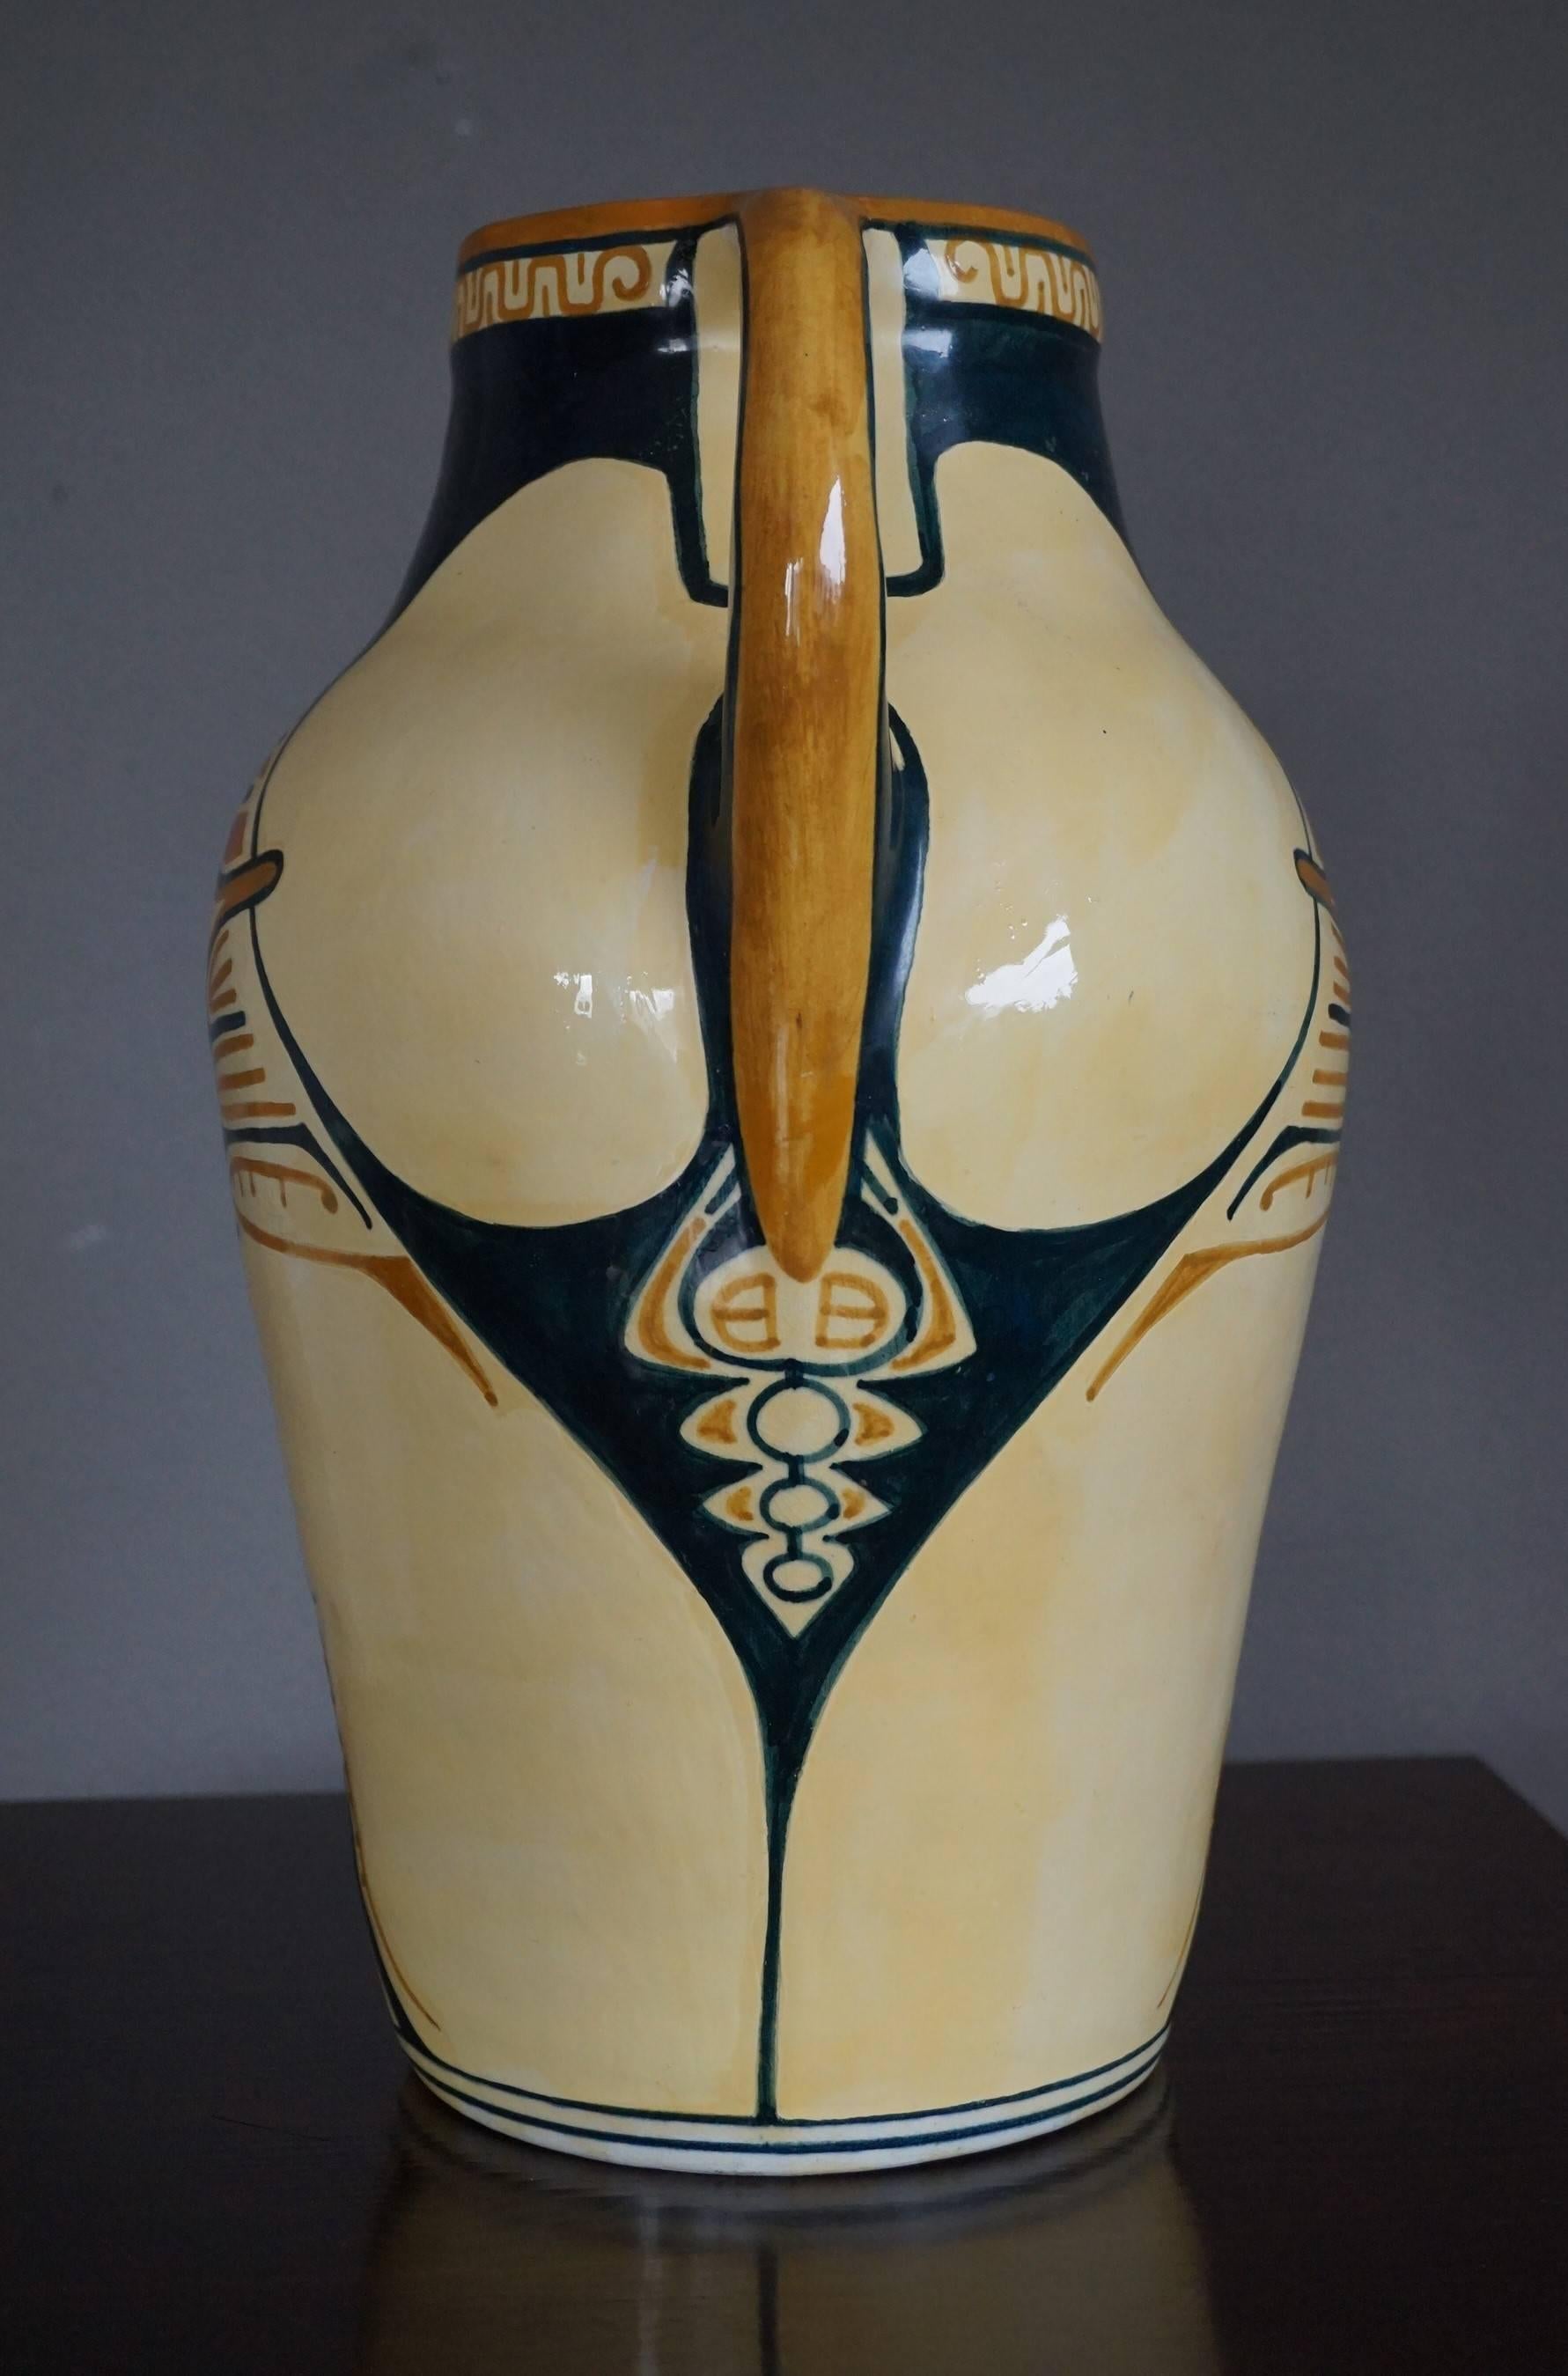 Beautiful Arts & Crafts eyecatcher.

This one of a kind, hand-crafted vase from the 'Dordtsche Kunst Pottery' is a wonderful sight to see. Vases from DKP are very rare, because the studio only existed from 1903-1908 and in the two World Wars that